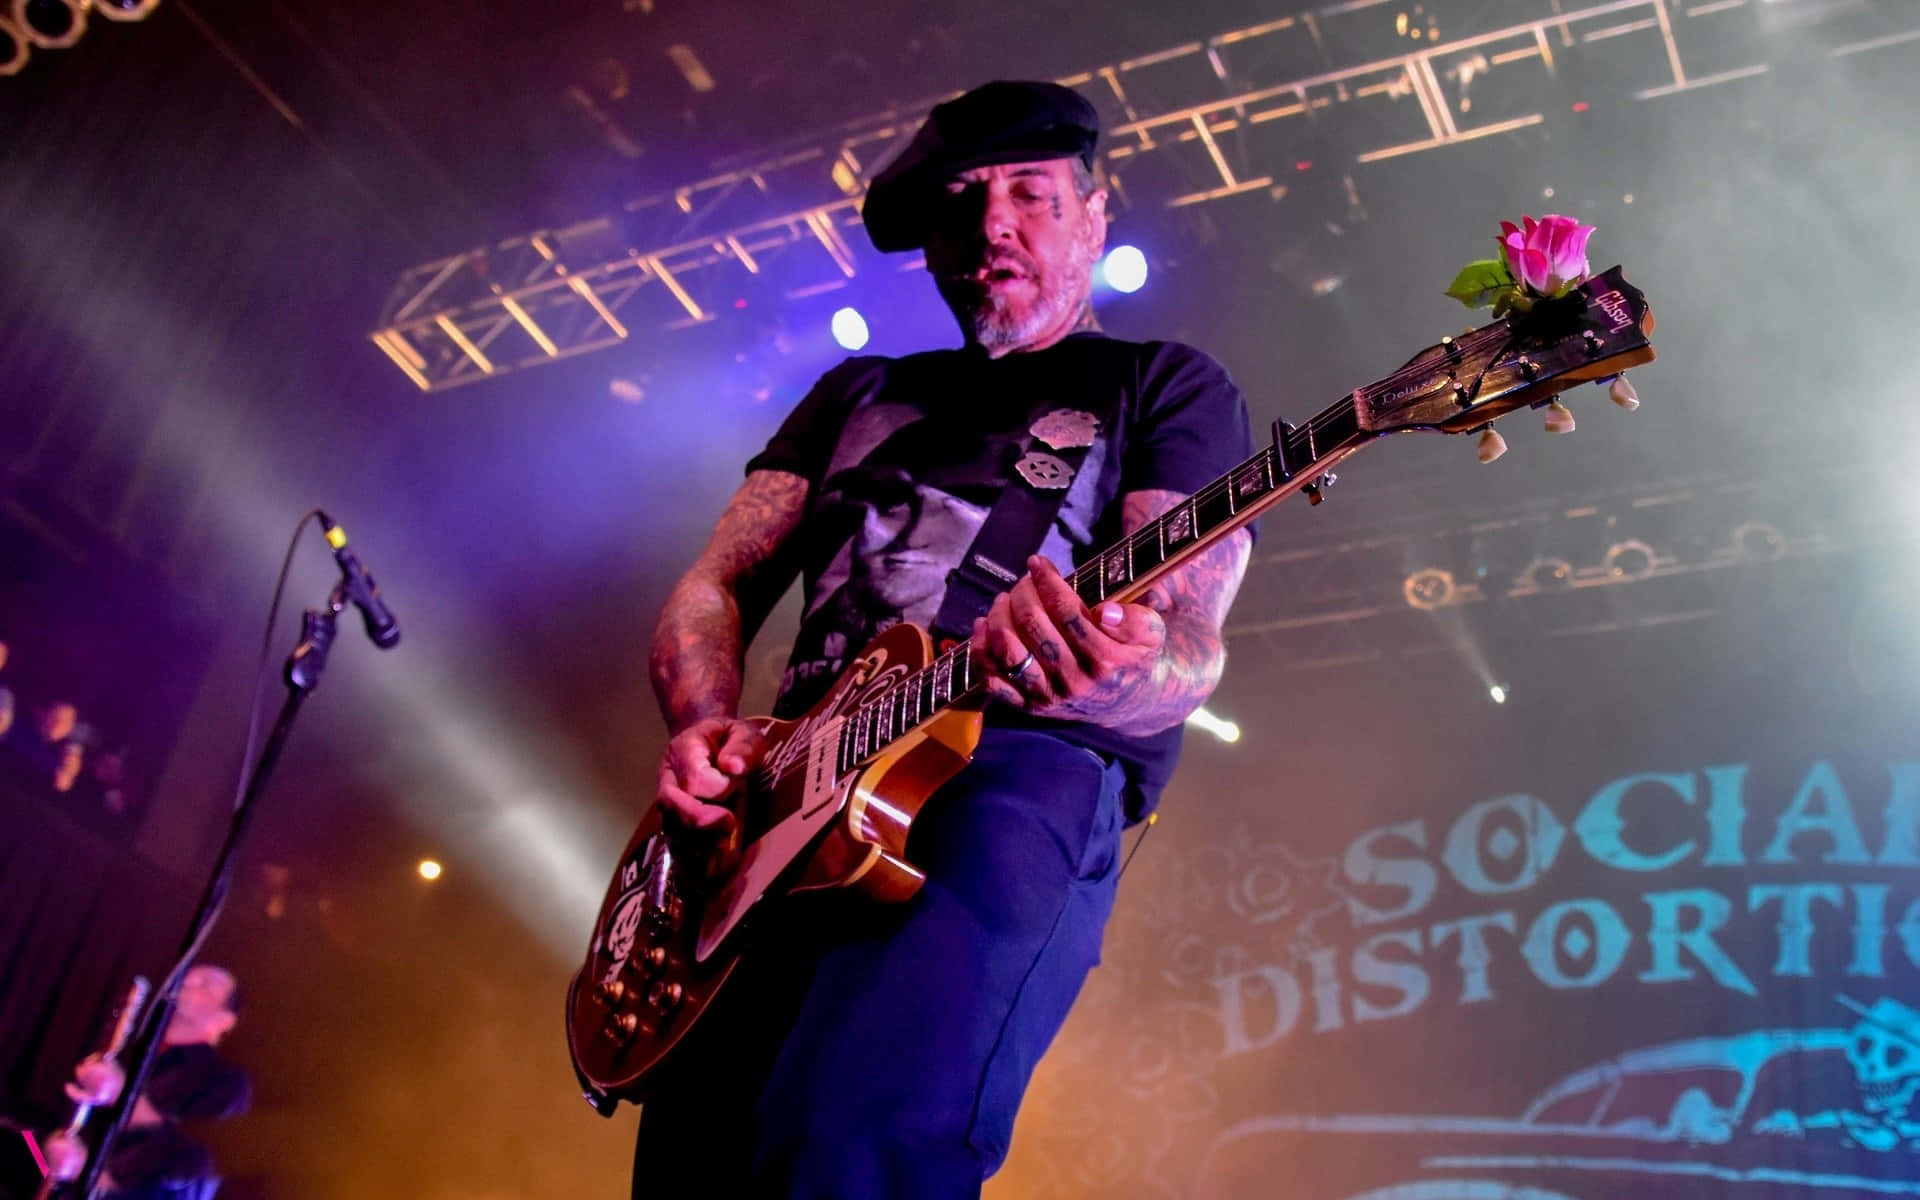 Frontmand Mike Ness Social Distortion Tapet Wallpaper